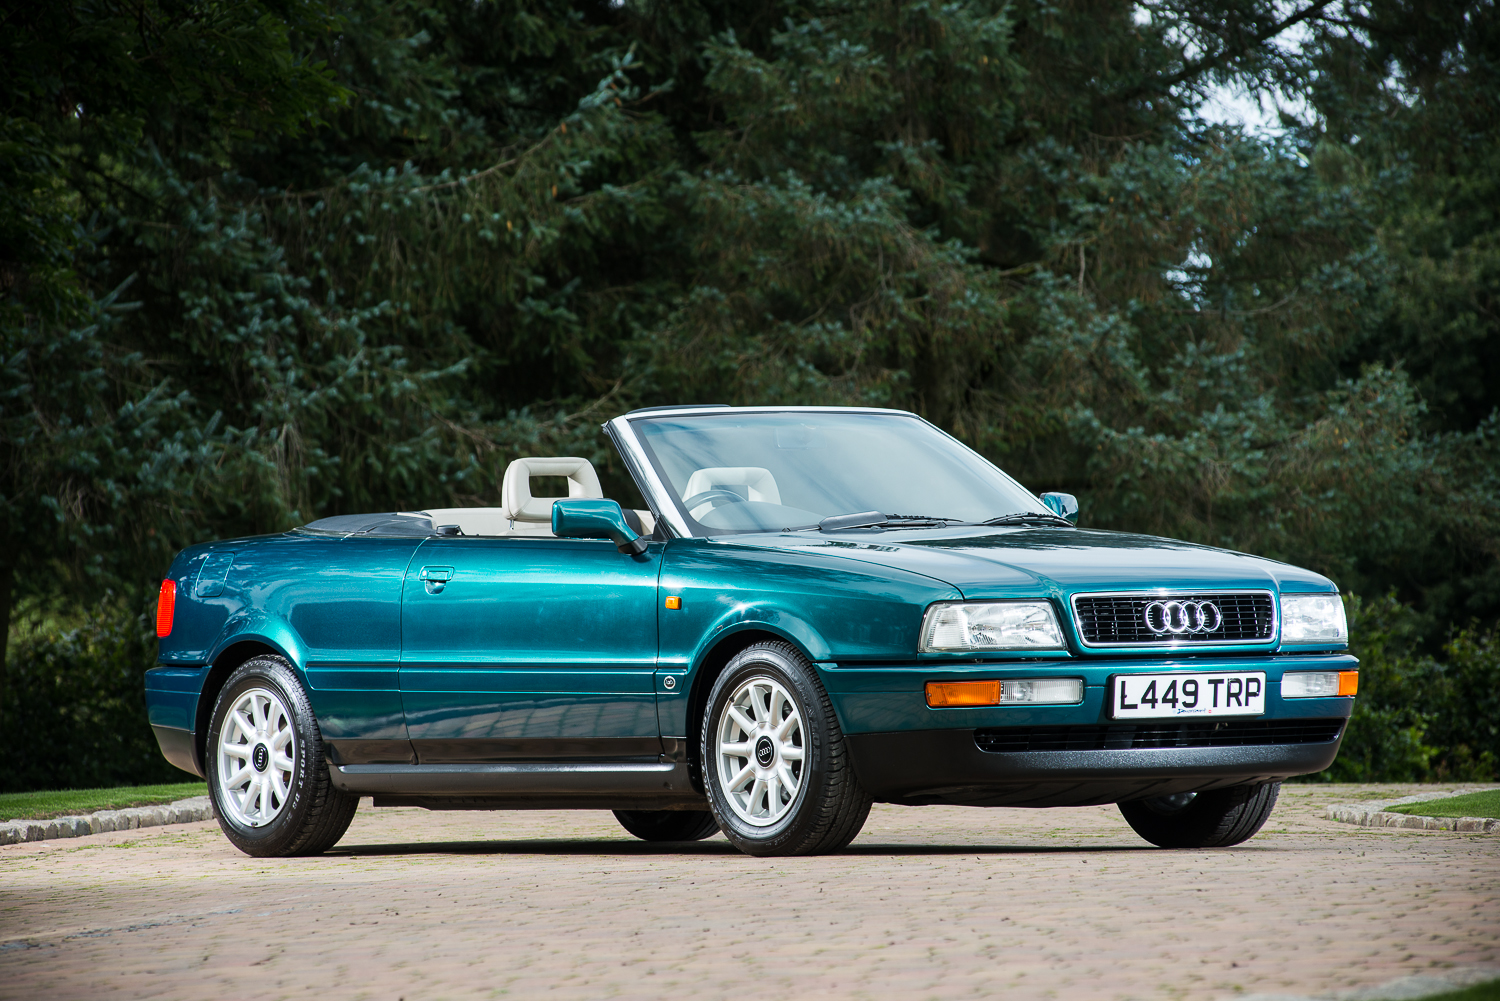 1994 Audi Cabriolet - The Personal Conveyance of Diana Princess of Wales front angle top down.jpg